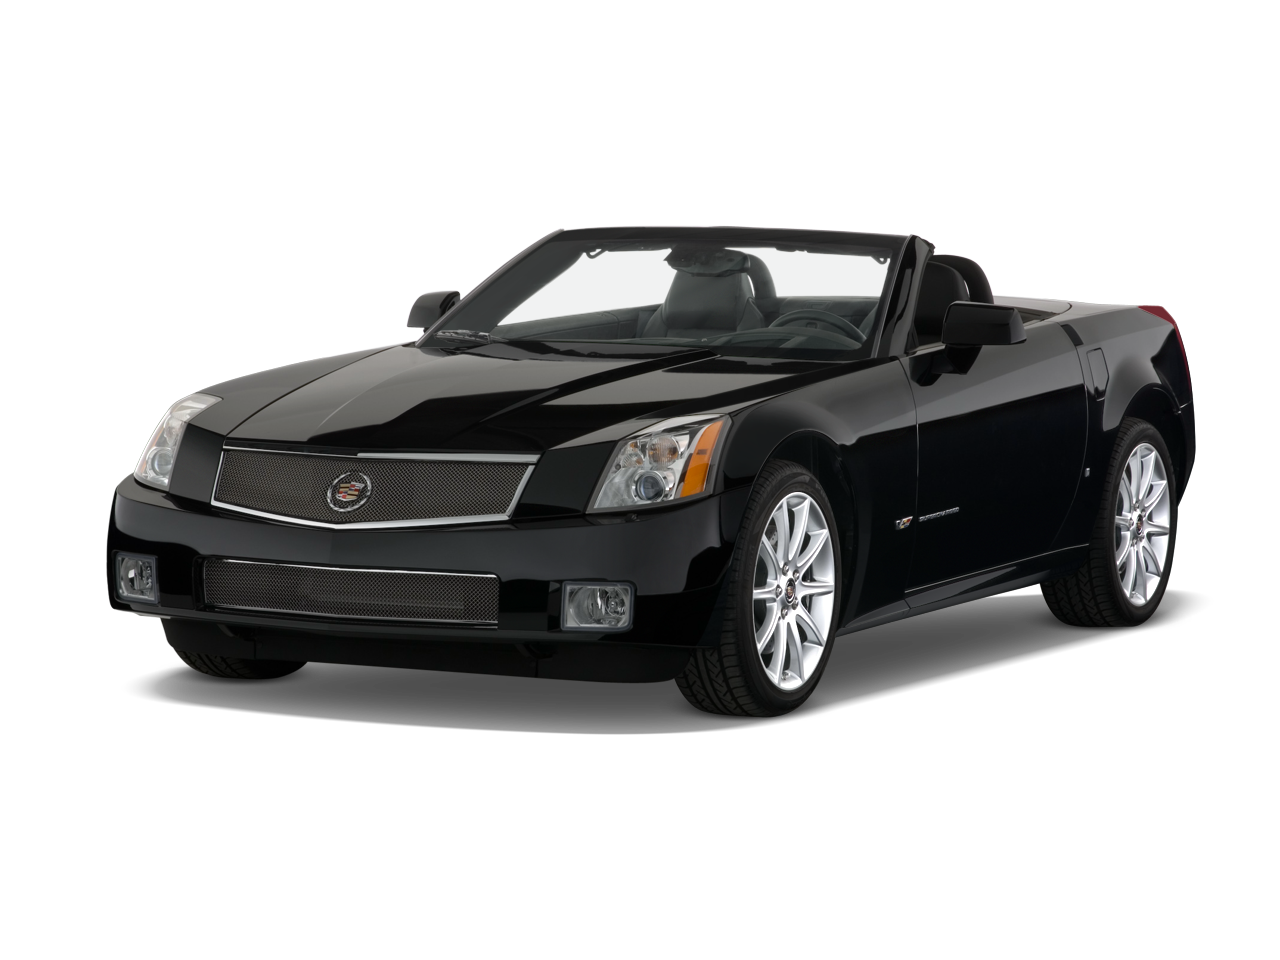 2009 Cadillac XLR-V Prices, Reviews, and Photos - MotorTrend